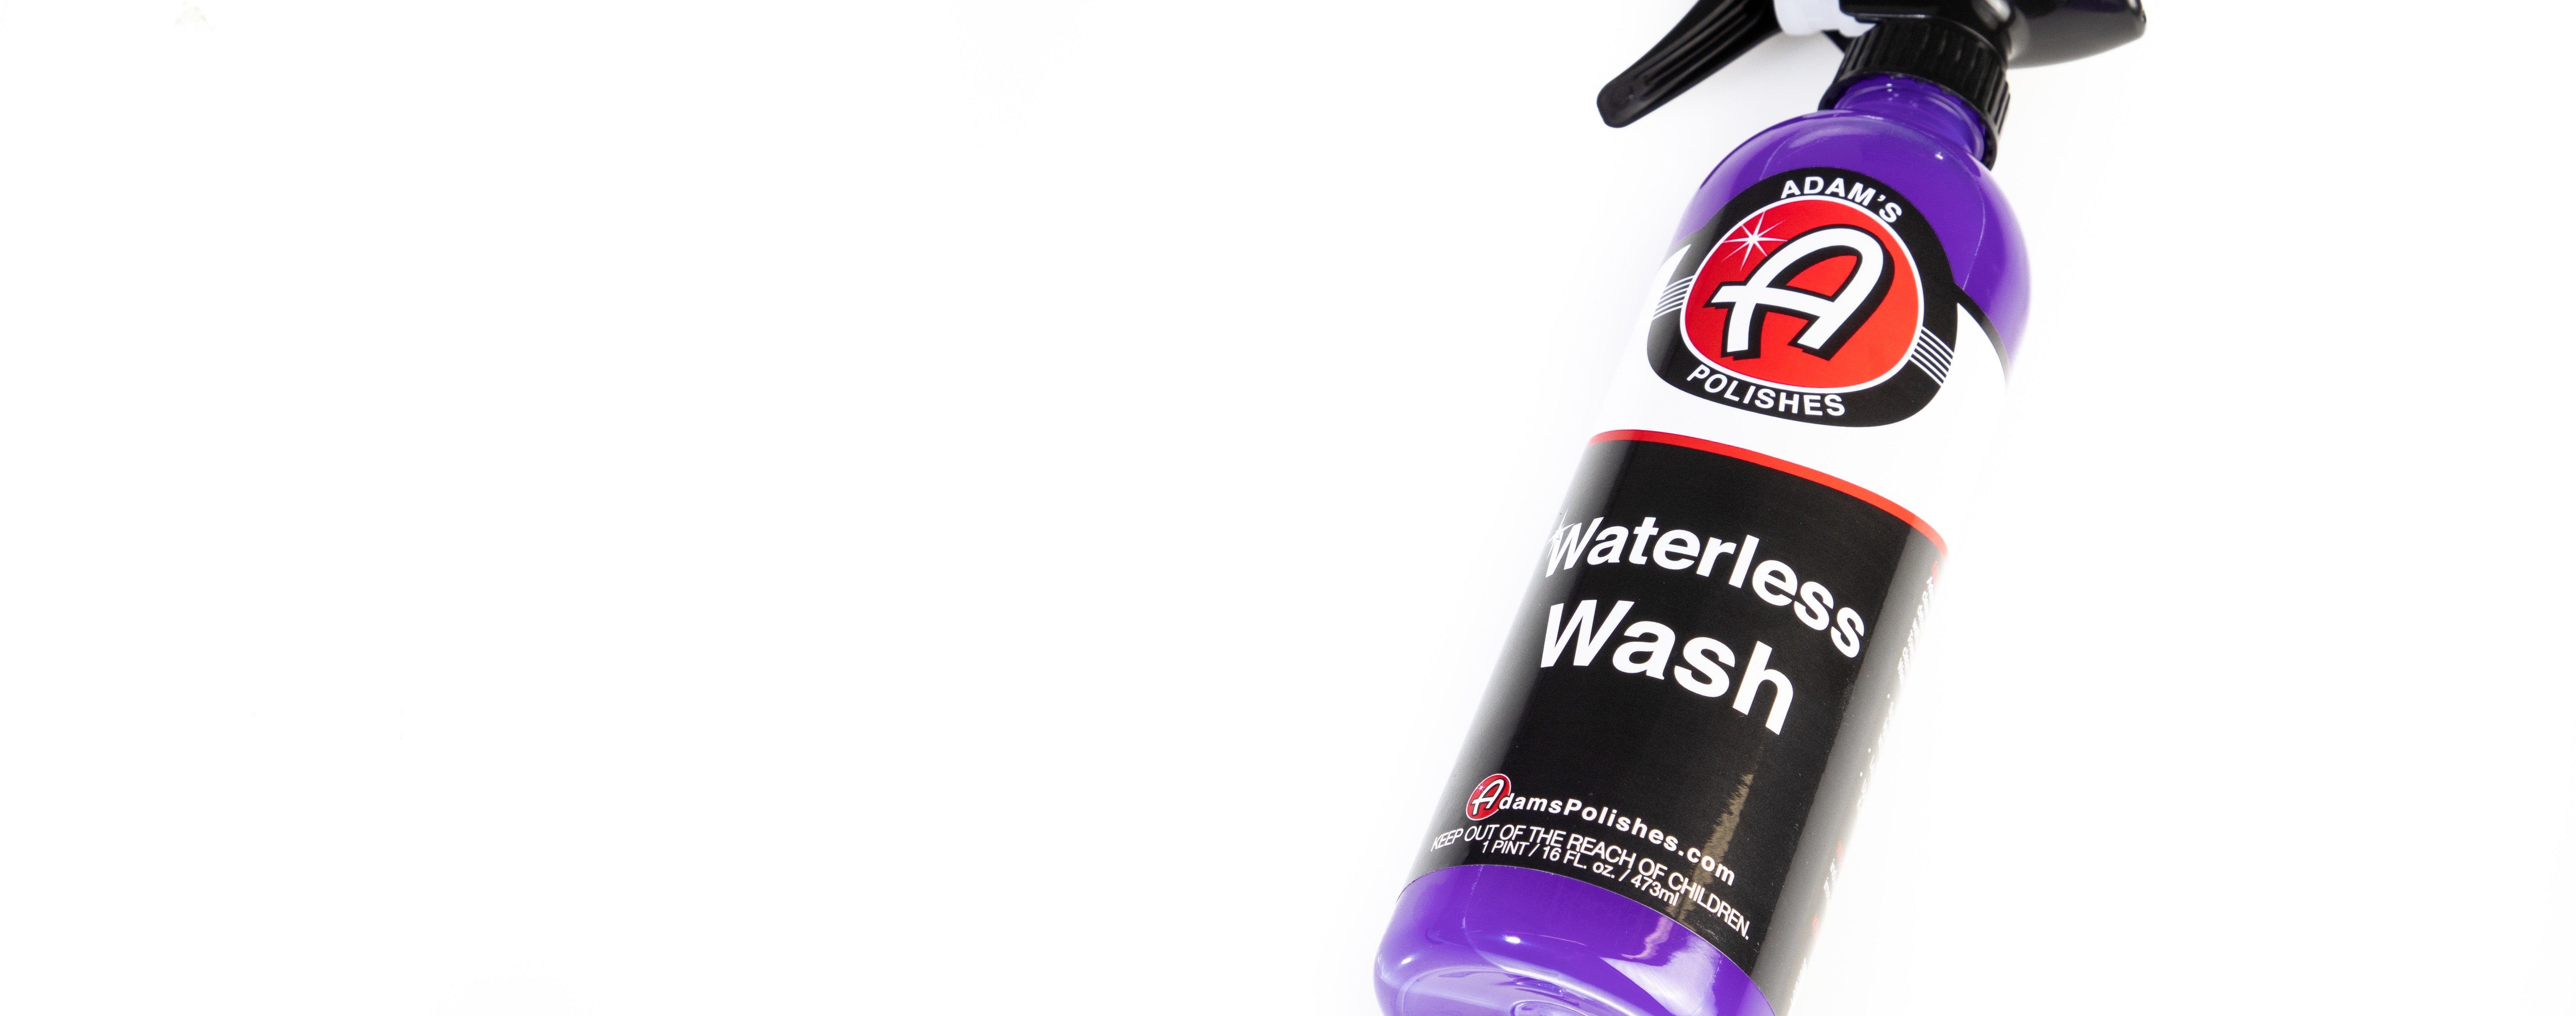 Adam's Polishes Rinseless Wash  Hoseless & Concentrated Car Washing